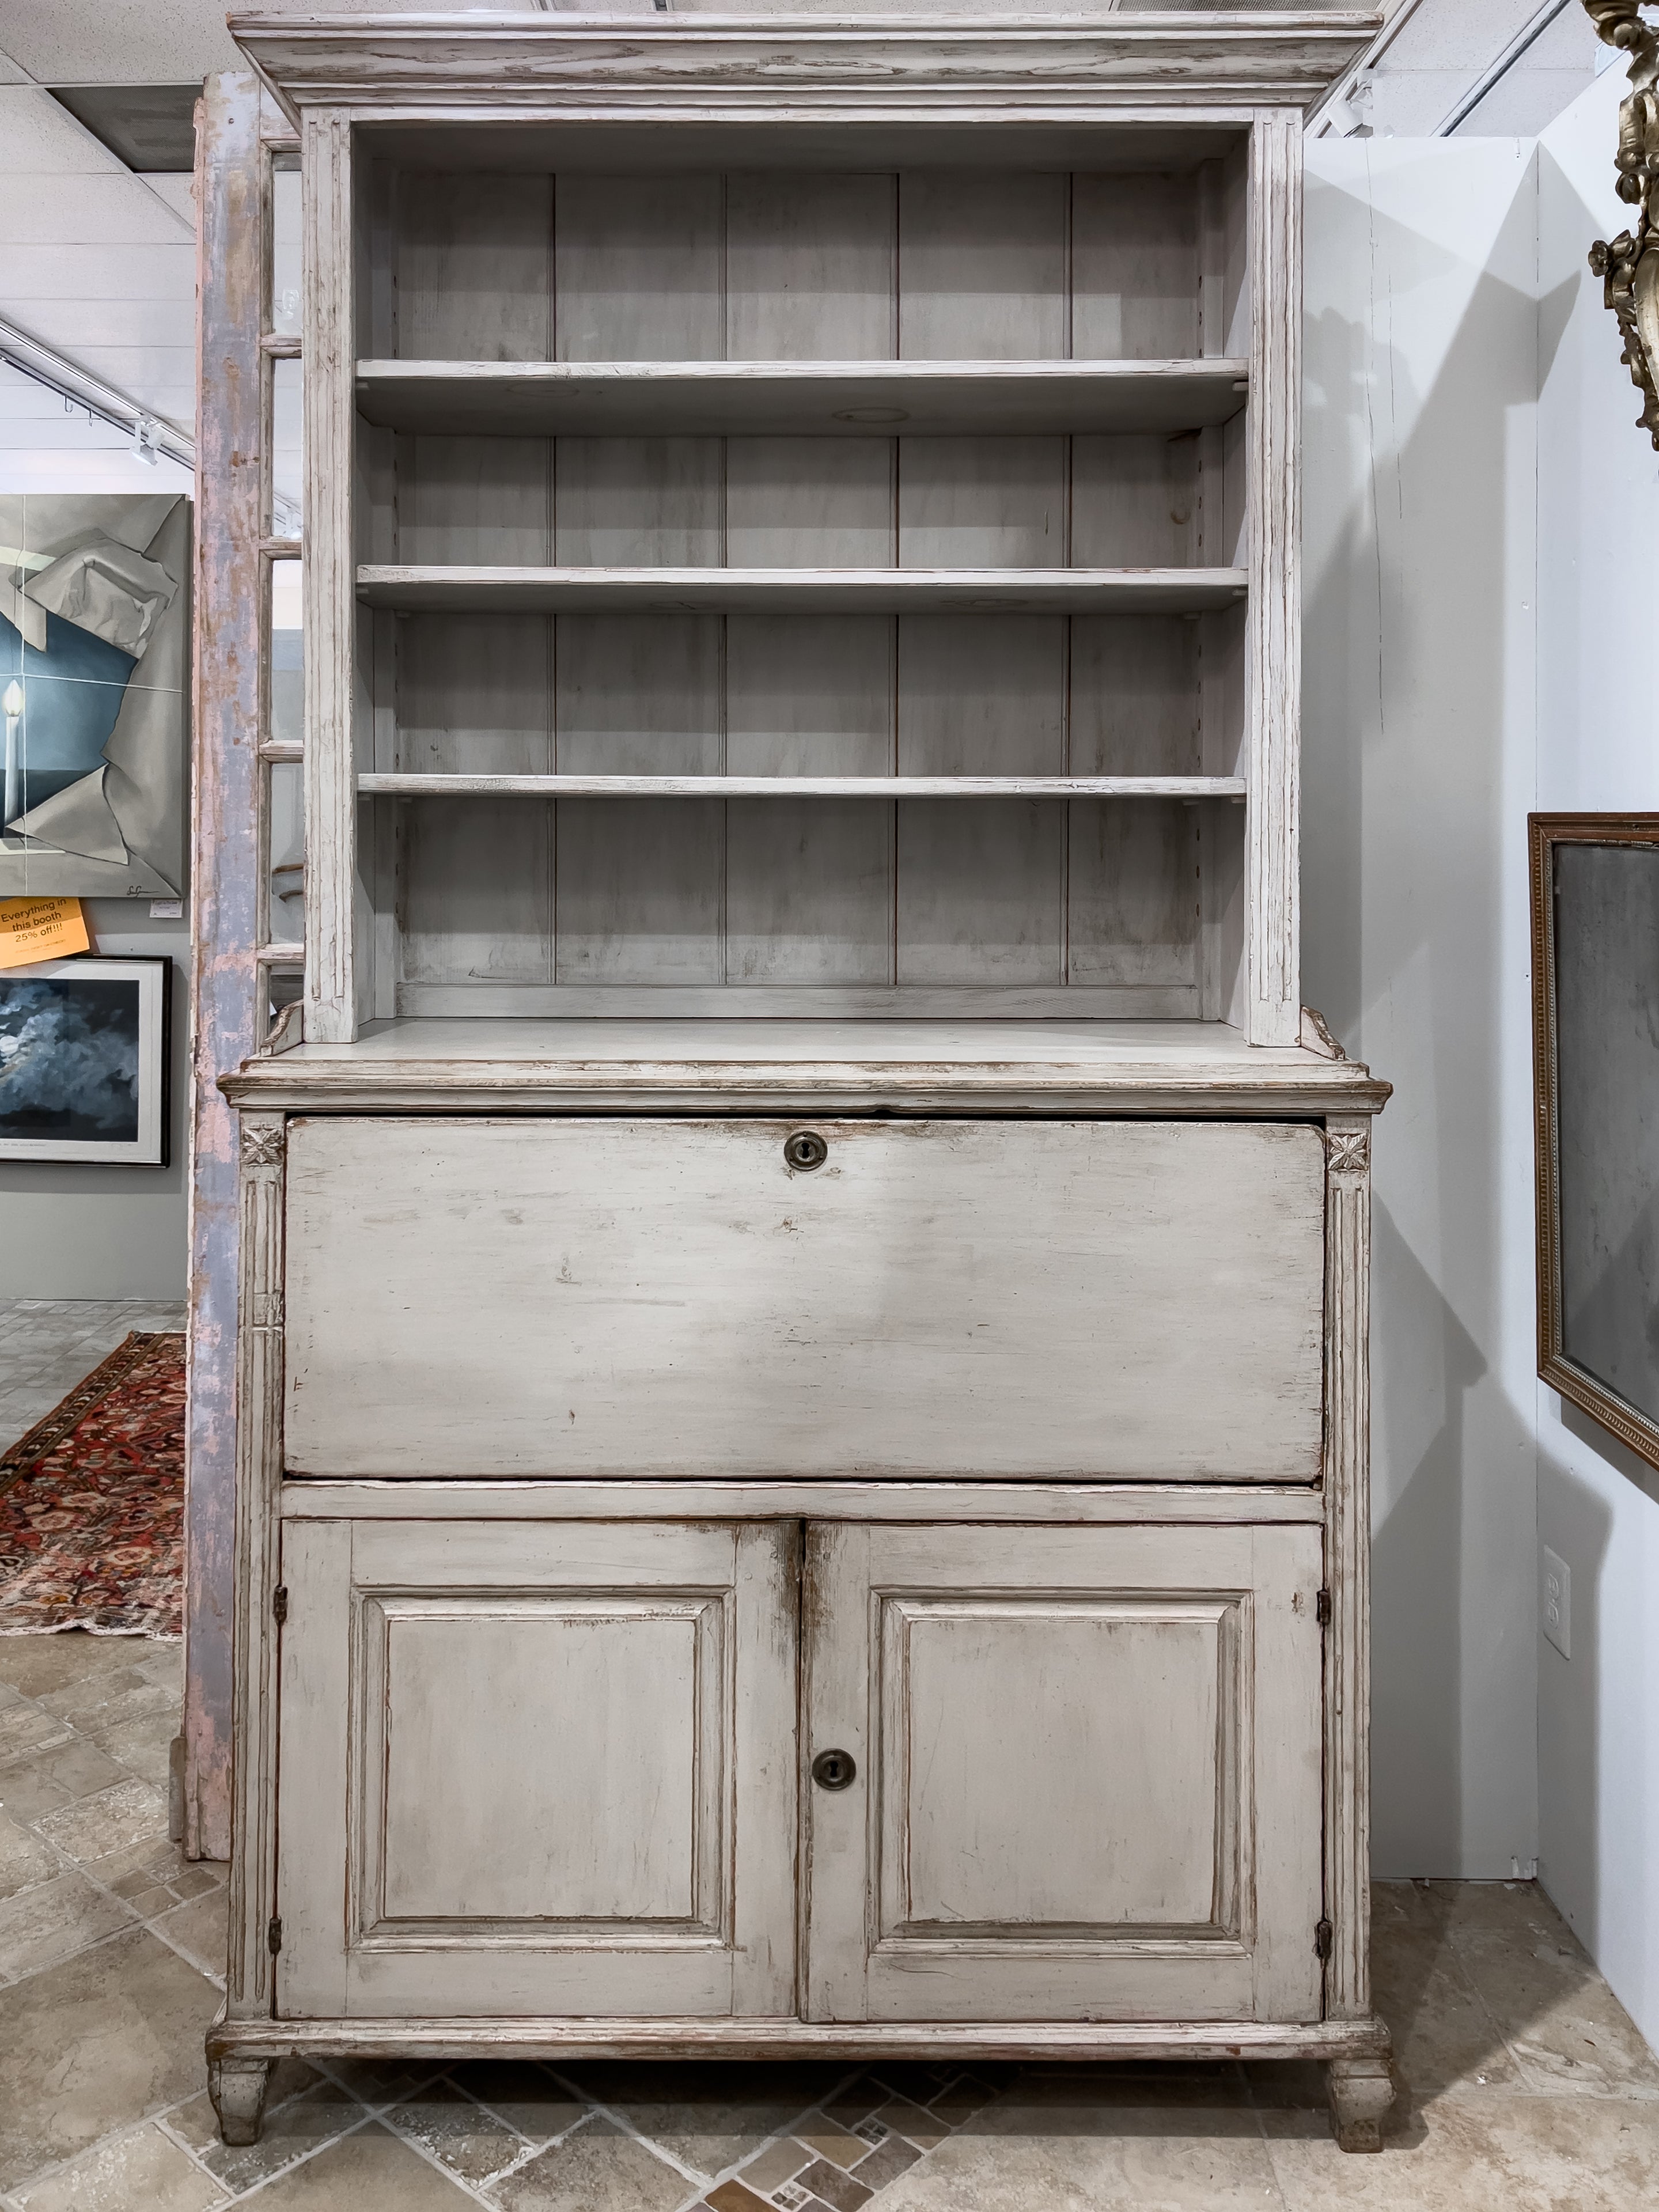 19th Century Swedish Secretary Desk with open book shelves above the fall front desk and bottom cabinet doors. The desk section has multiple small drawers and the lower section conceals 1 large pull out drawer and shelf above. It has a pale painted